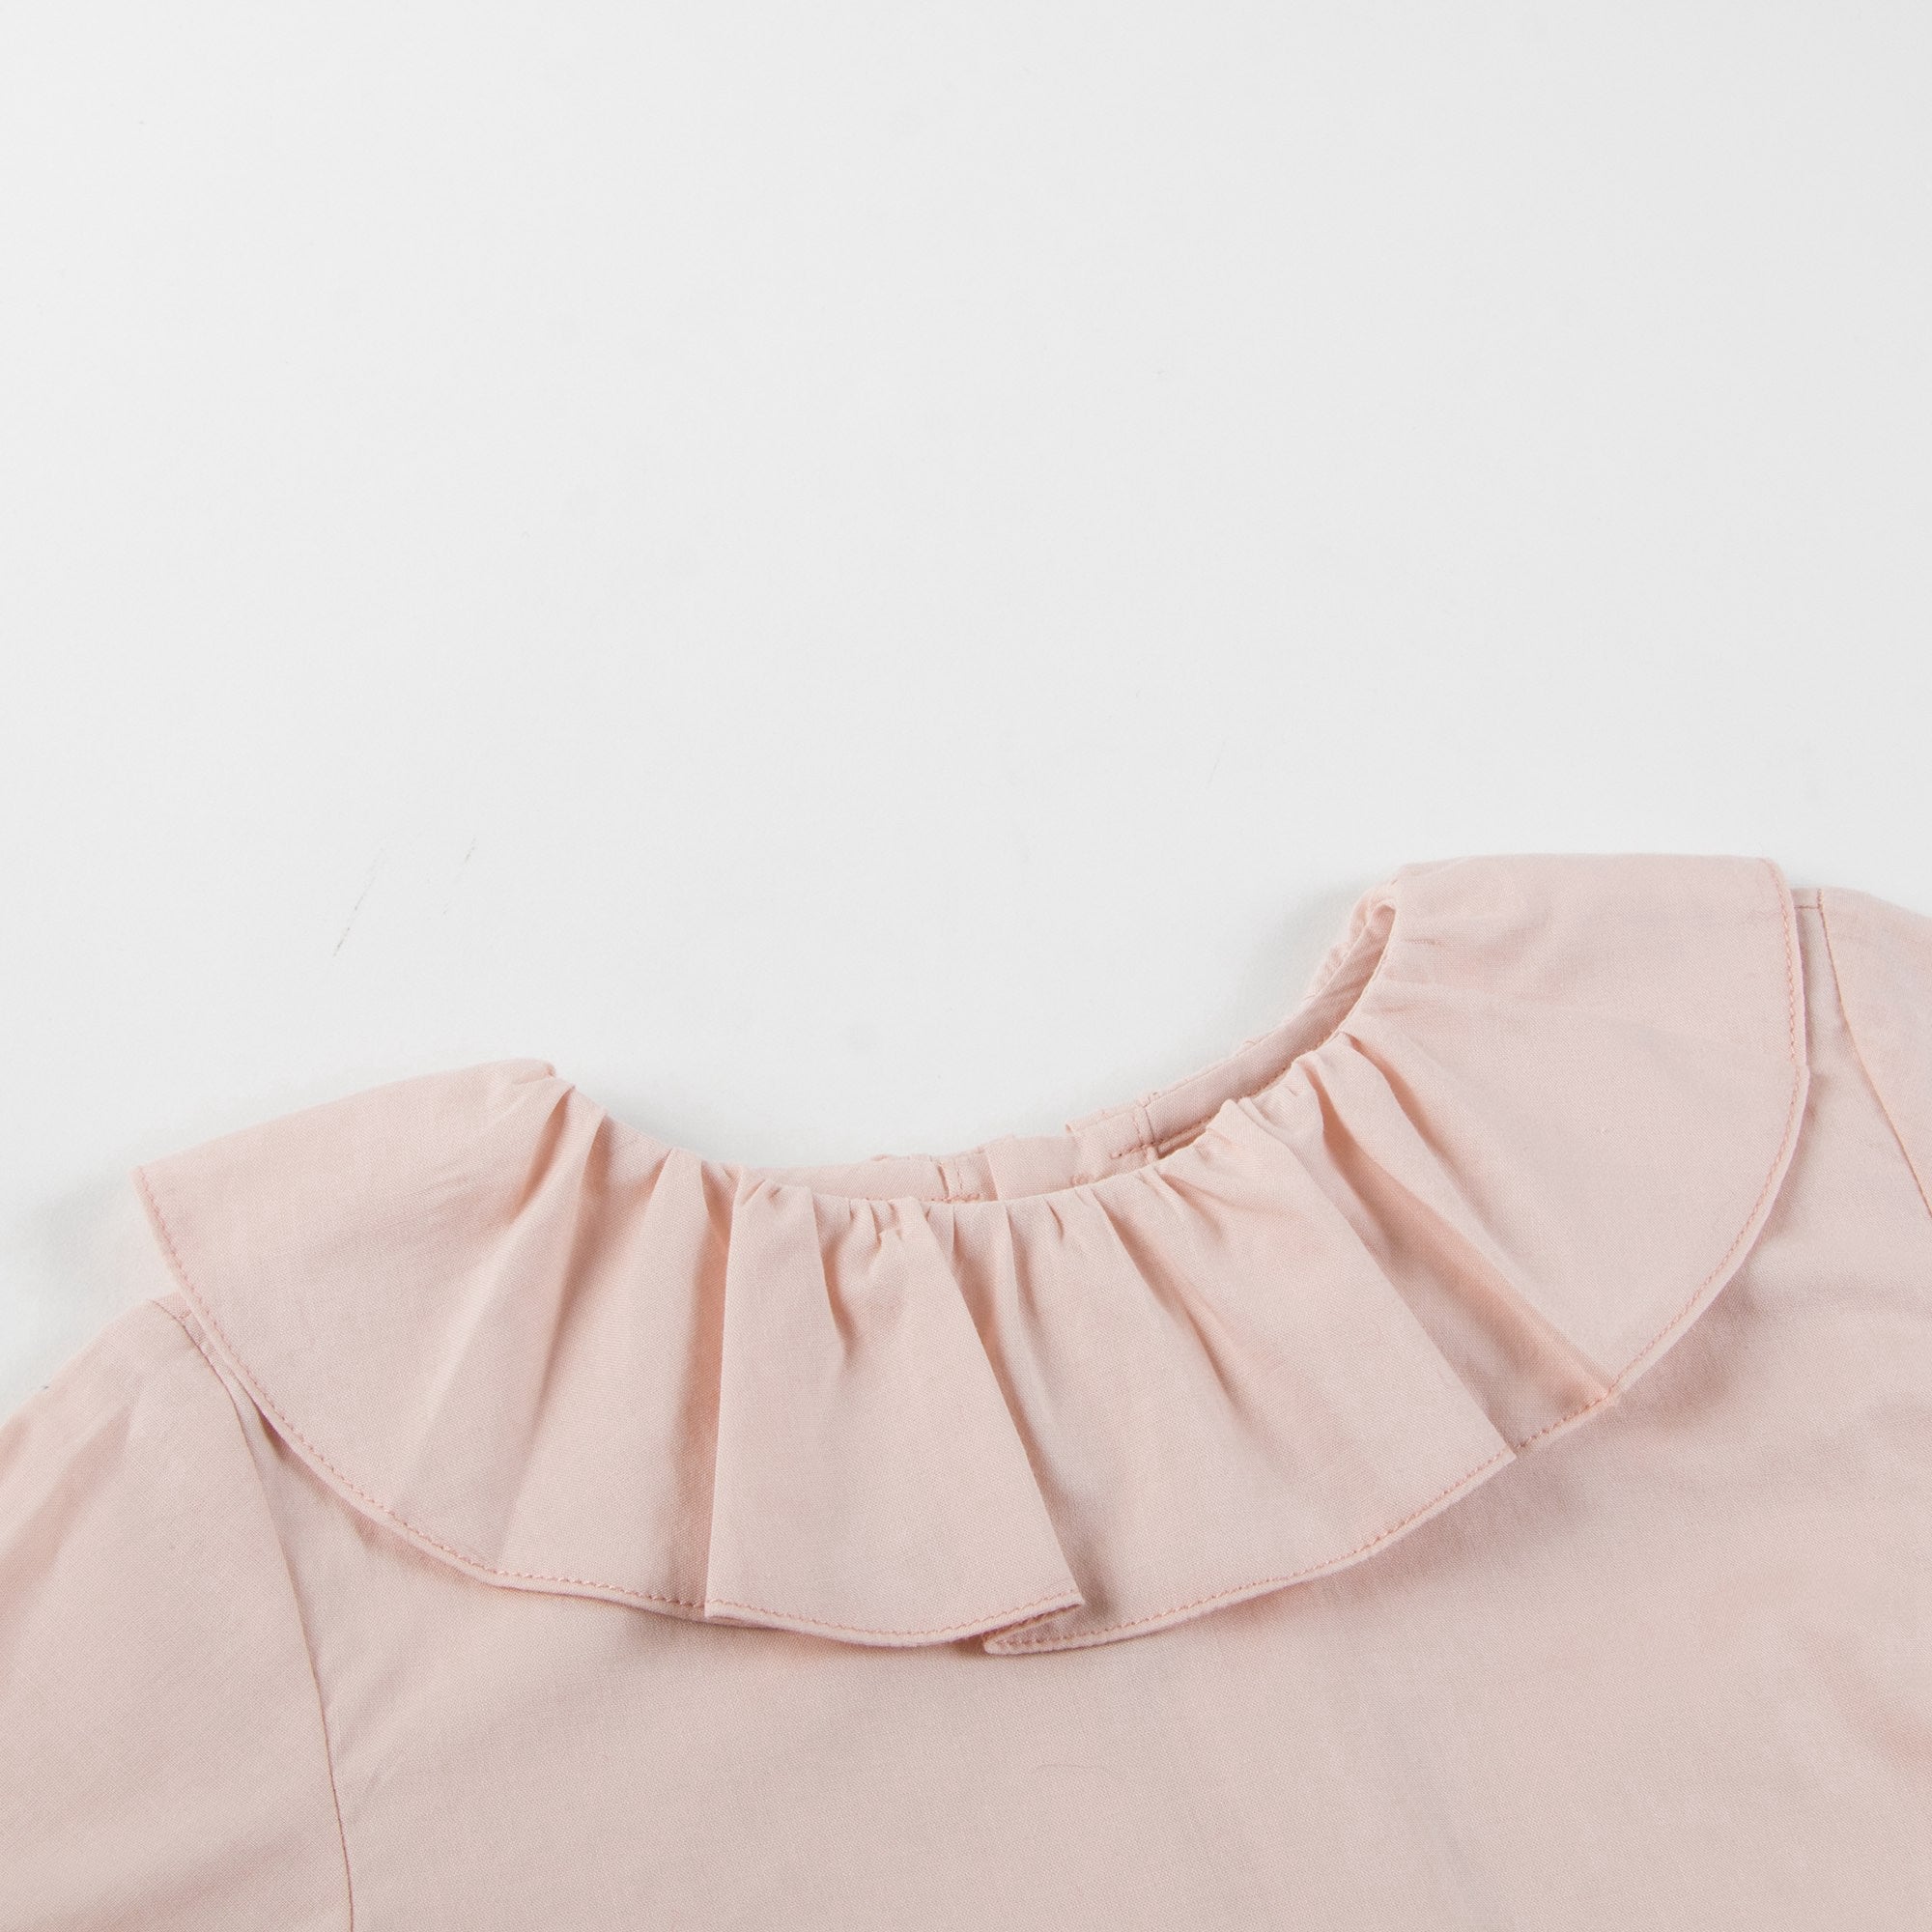 Girls Light Pink Cotton Blouse With Collar